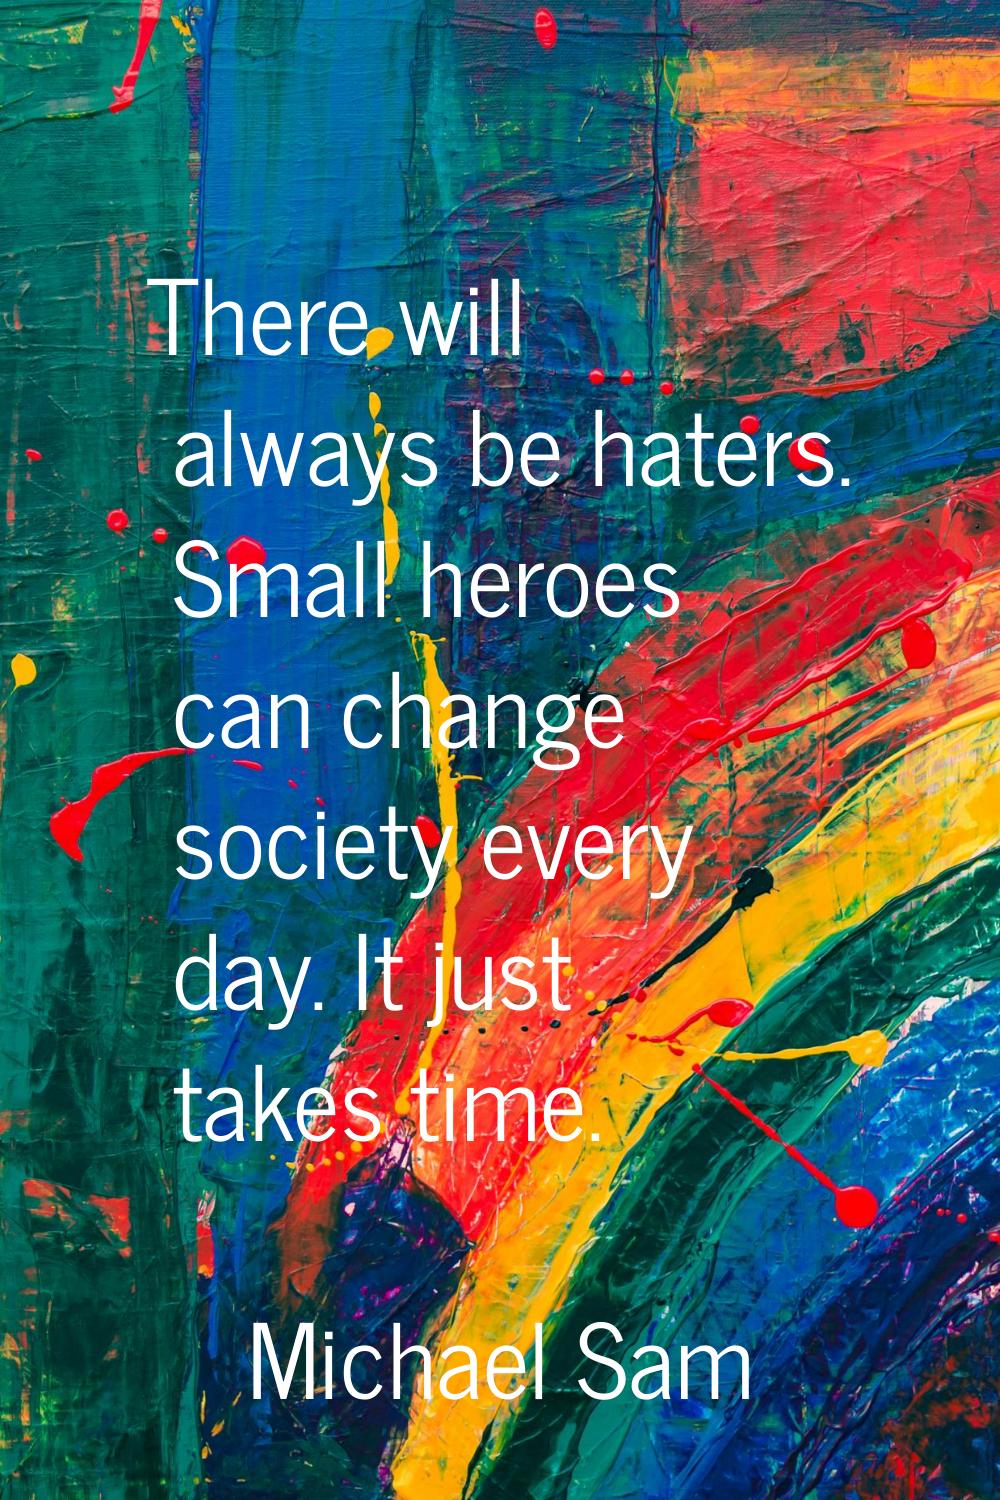 There will always be haters. Small heroes can change society every day. It just takes time.